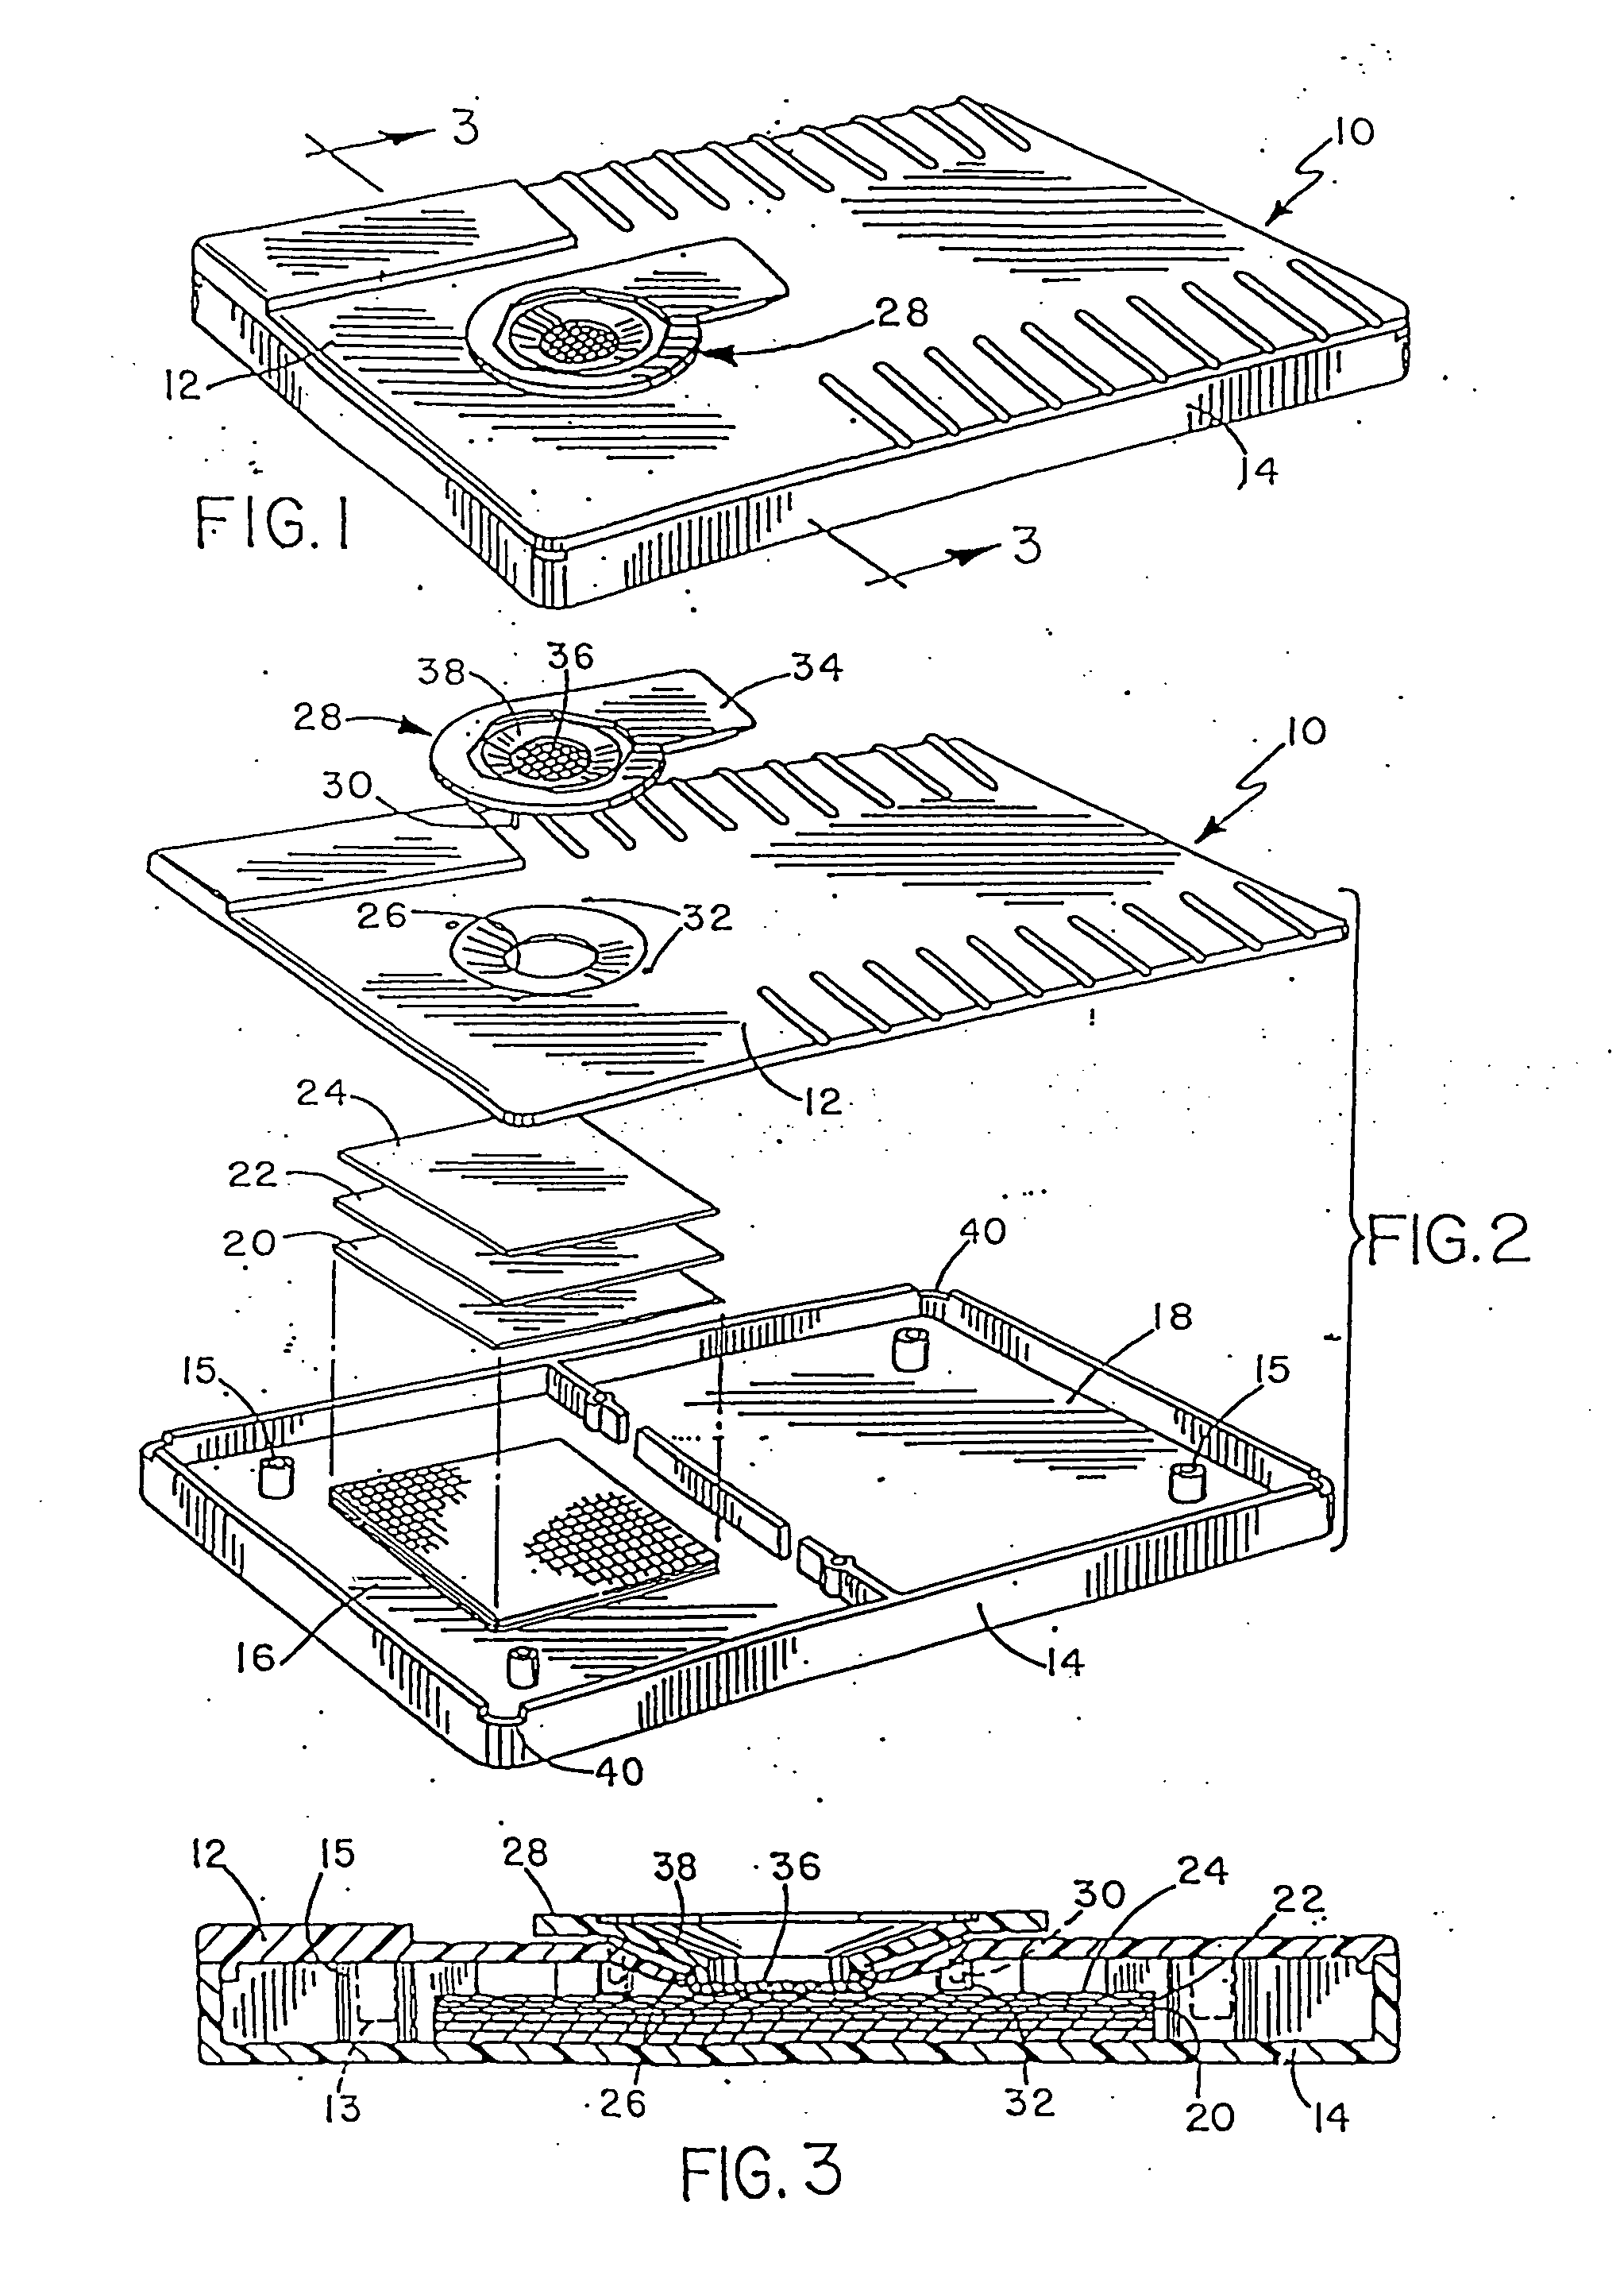 Immunodiagnostic device having a desiccant incorporated therein